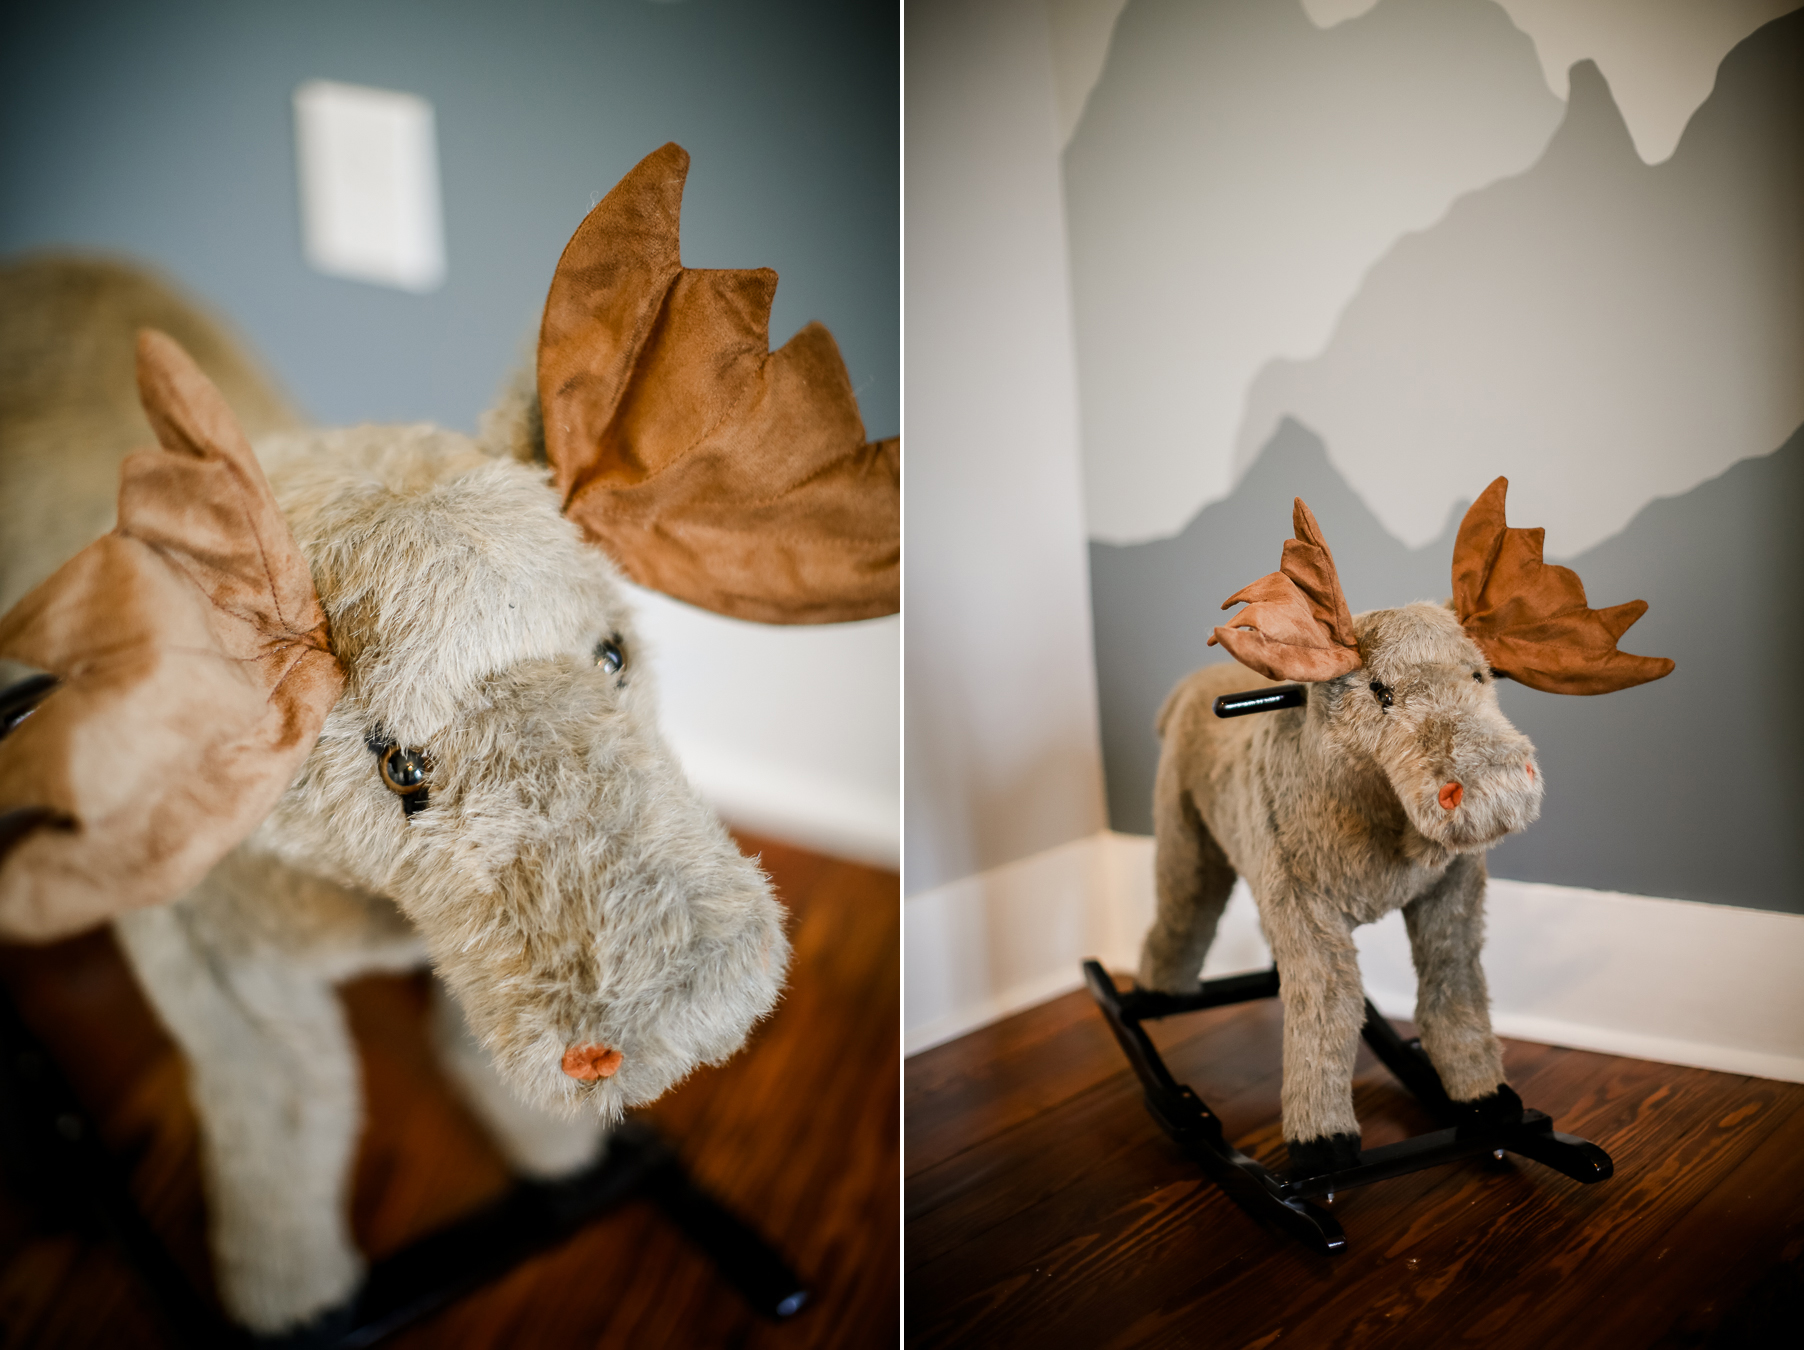 Rocking moose in the nursery by Knoxville Wedding Photographer, Amanda May Photos.